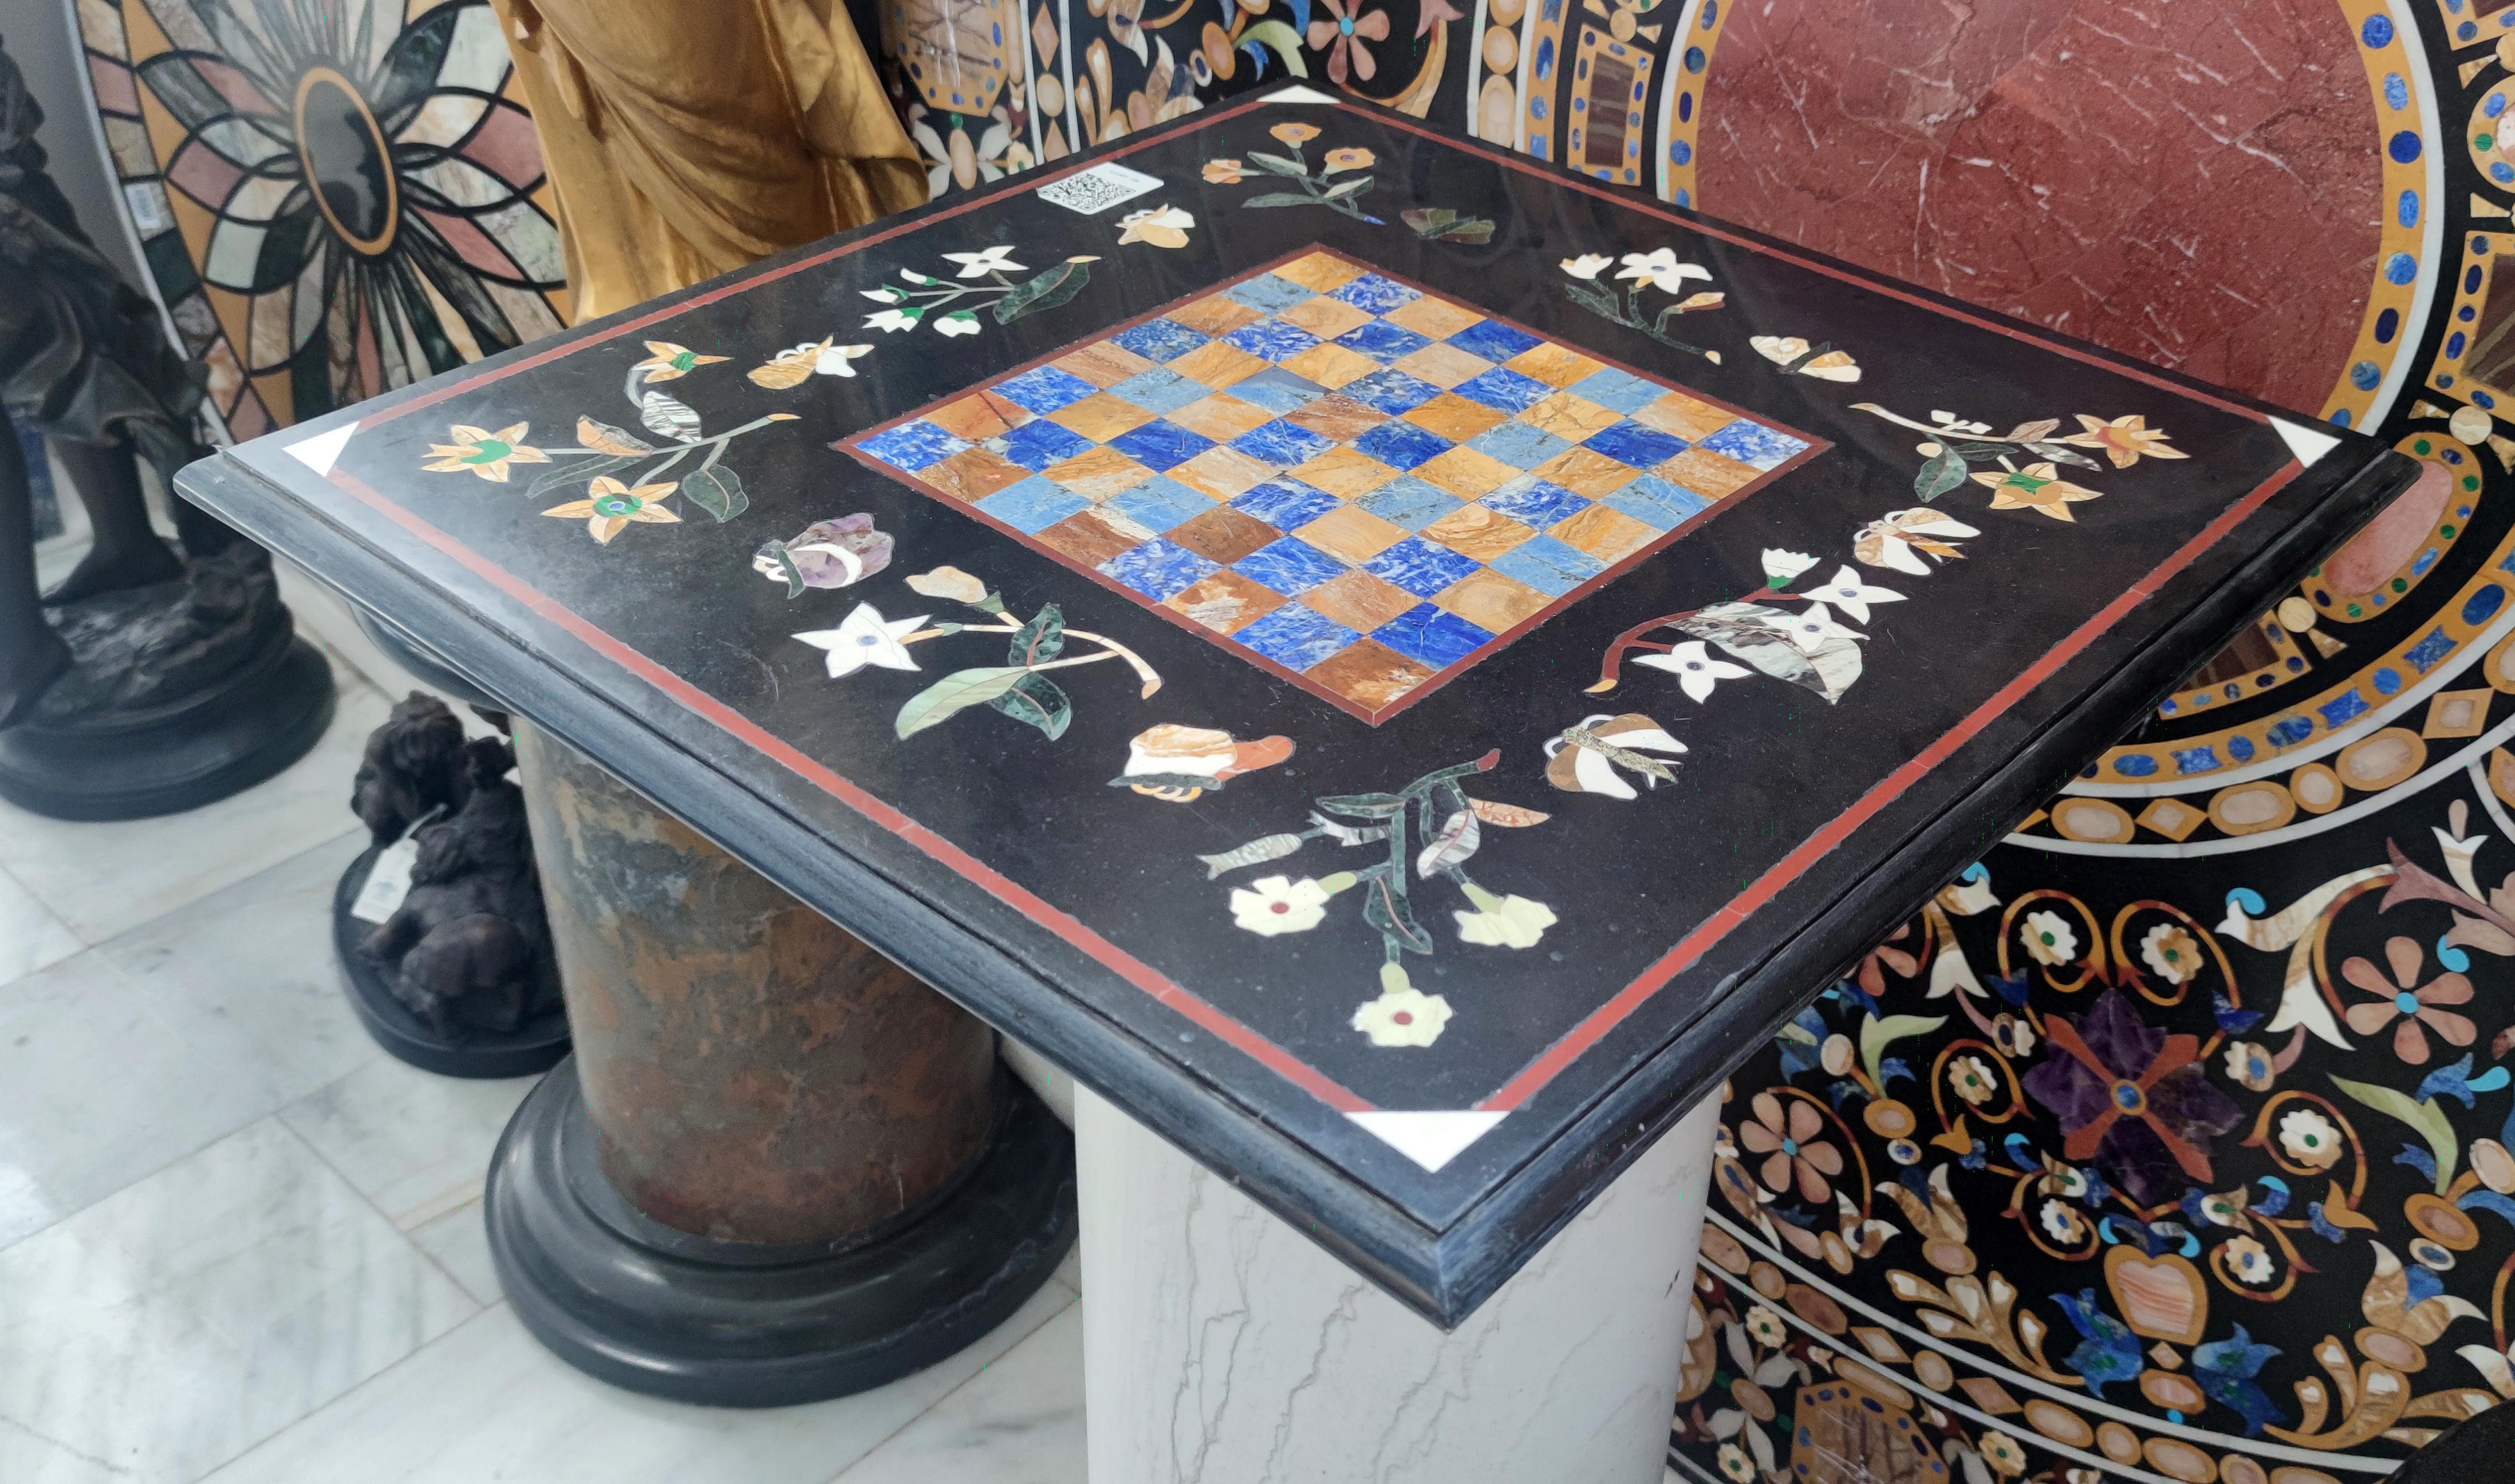 1990s Spanish Pietra Dura inlay mosaic square table top with chess board, handmade with semiprecious gemstones including blue lapis lazuli and green malachite